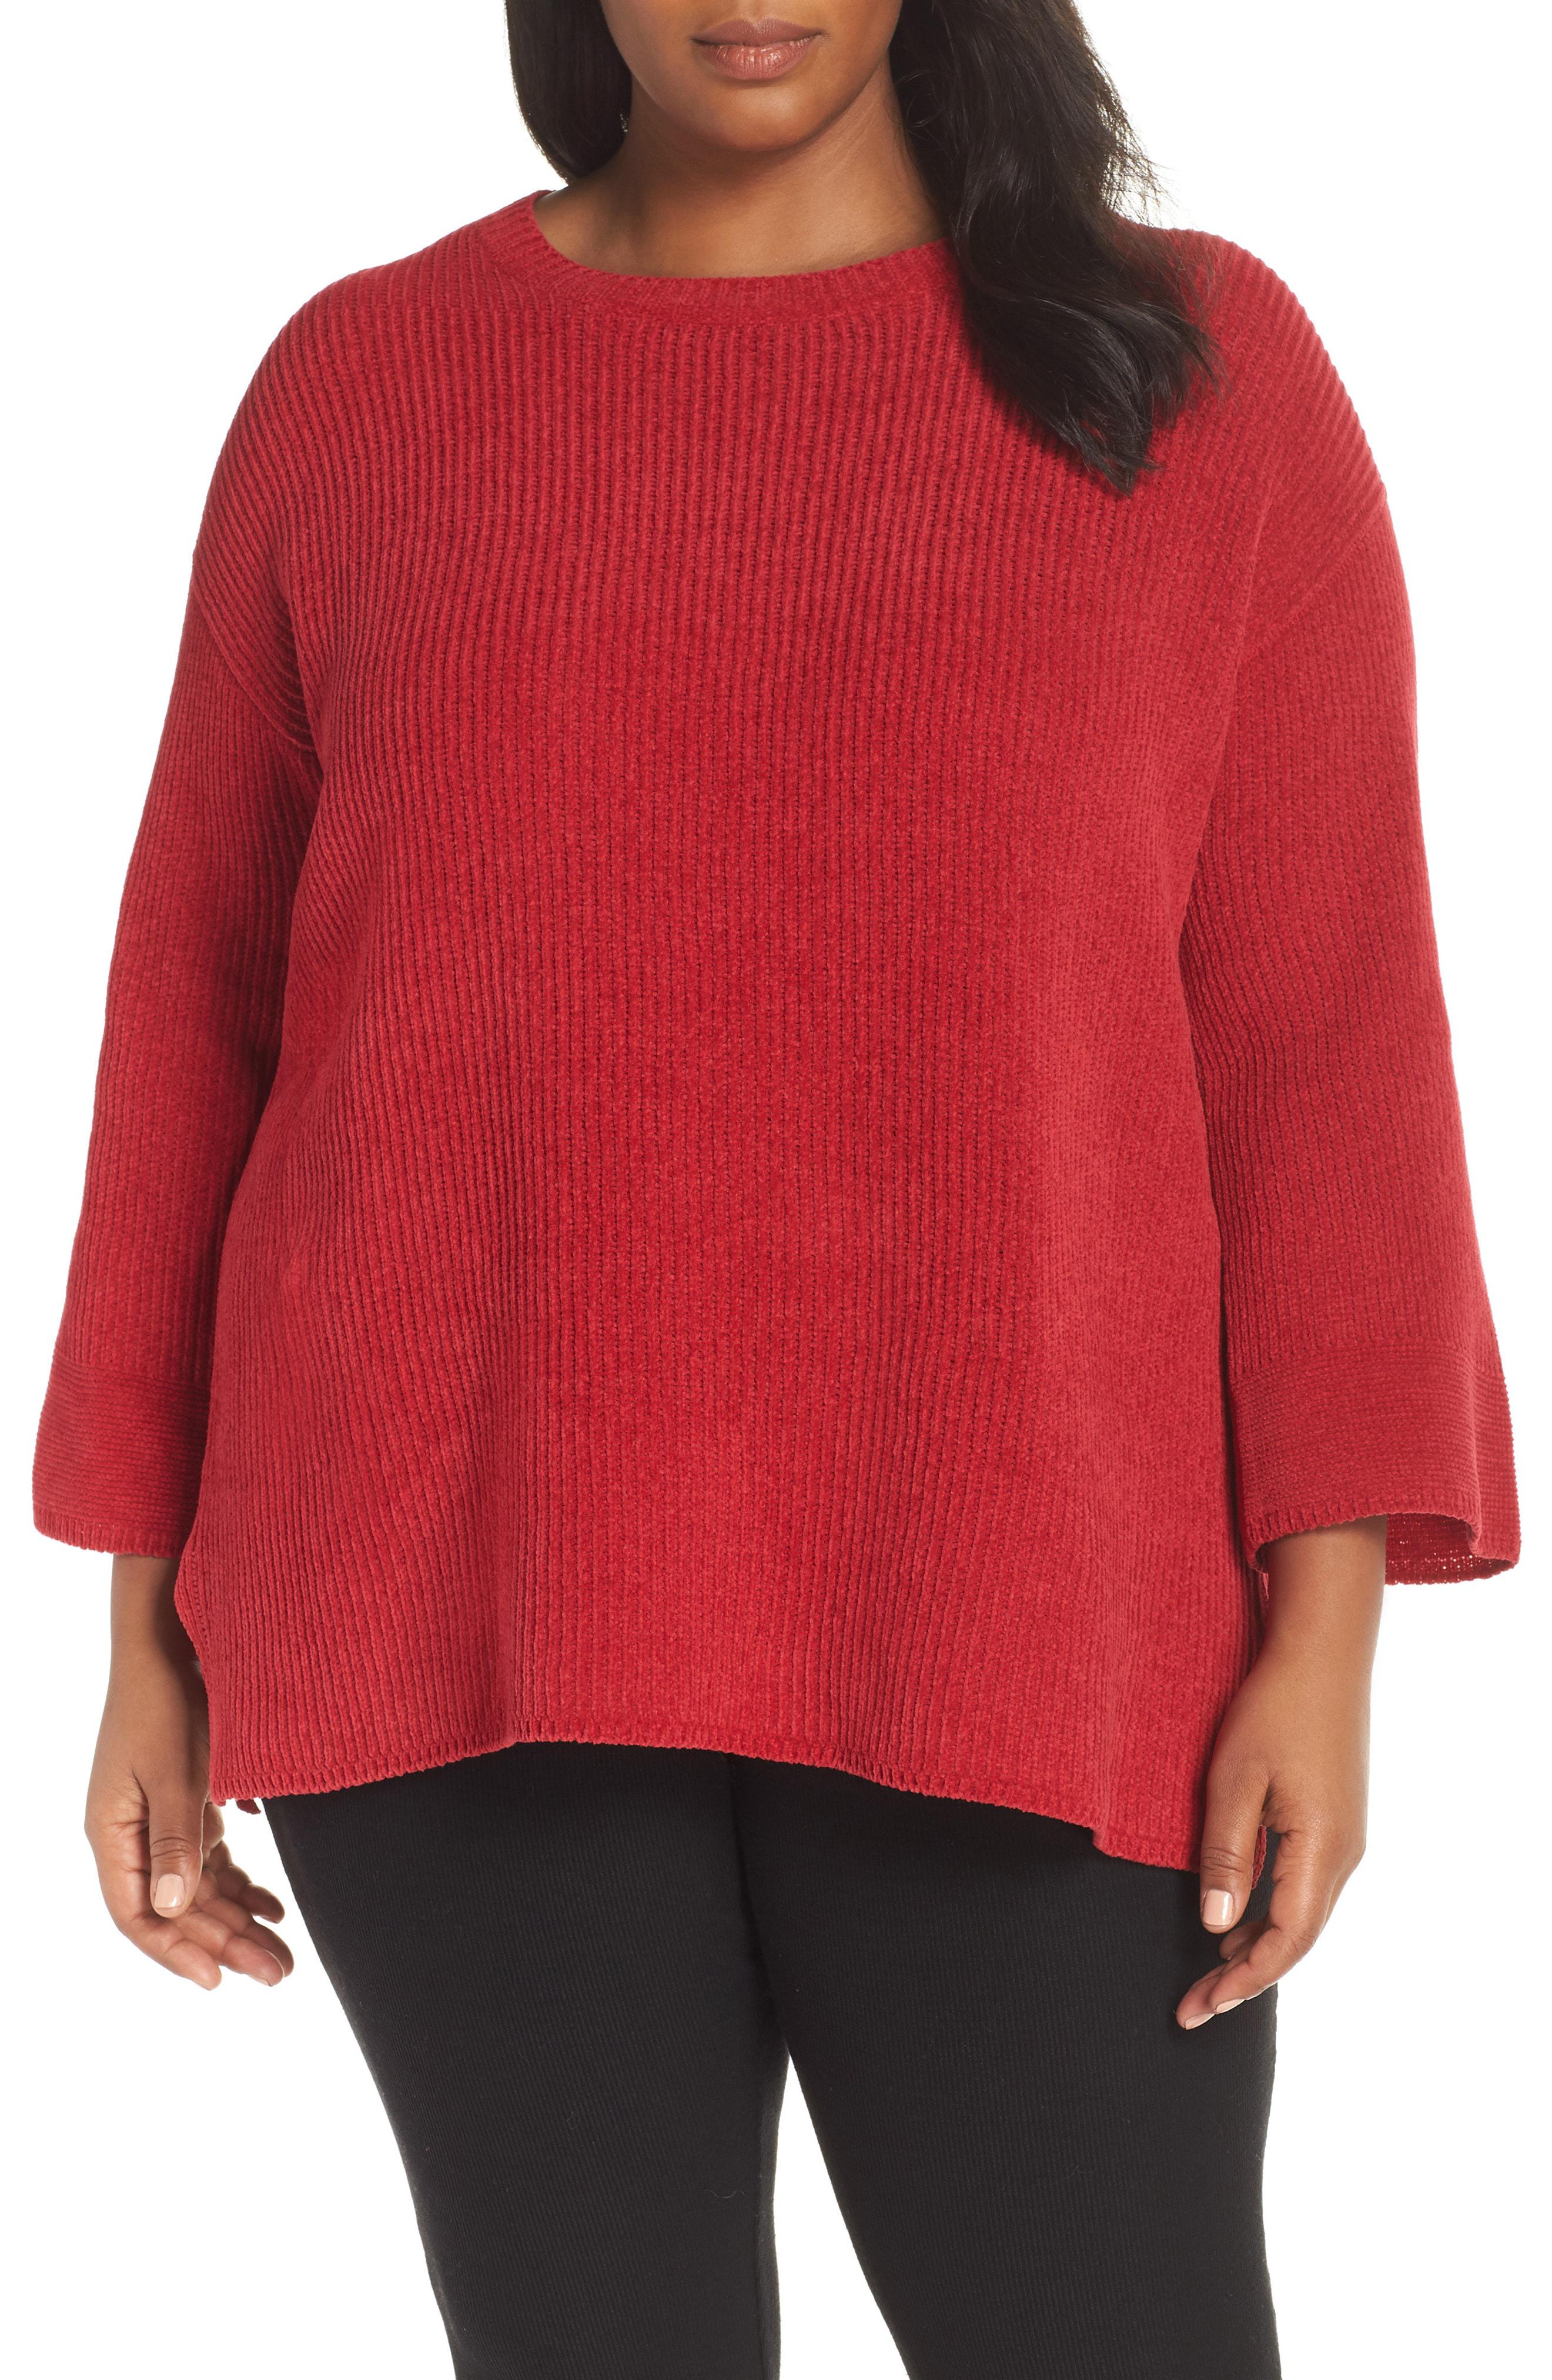 Lyst - Eileen Fisher Ribbed Organic Cotton Chenille Sweater in Red